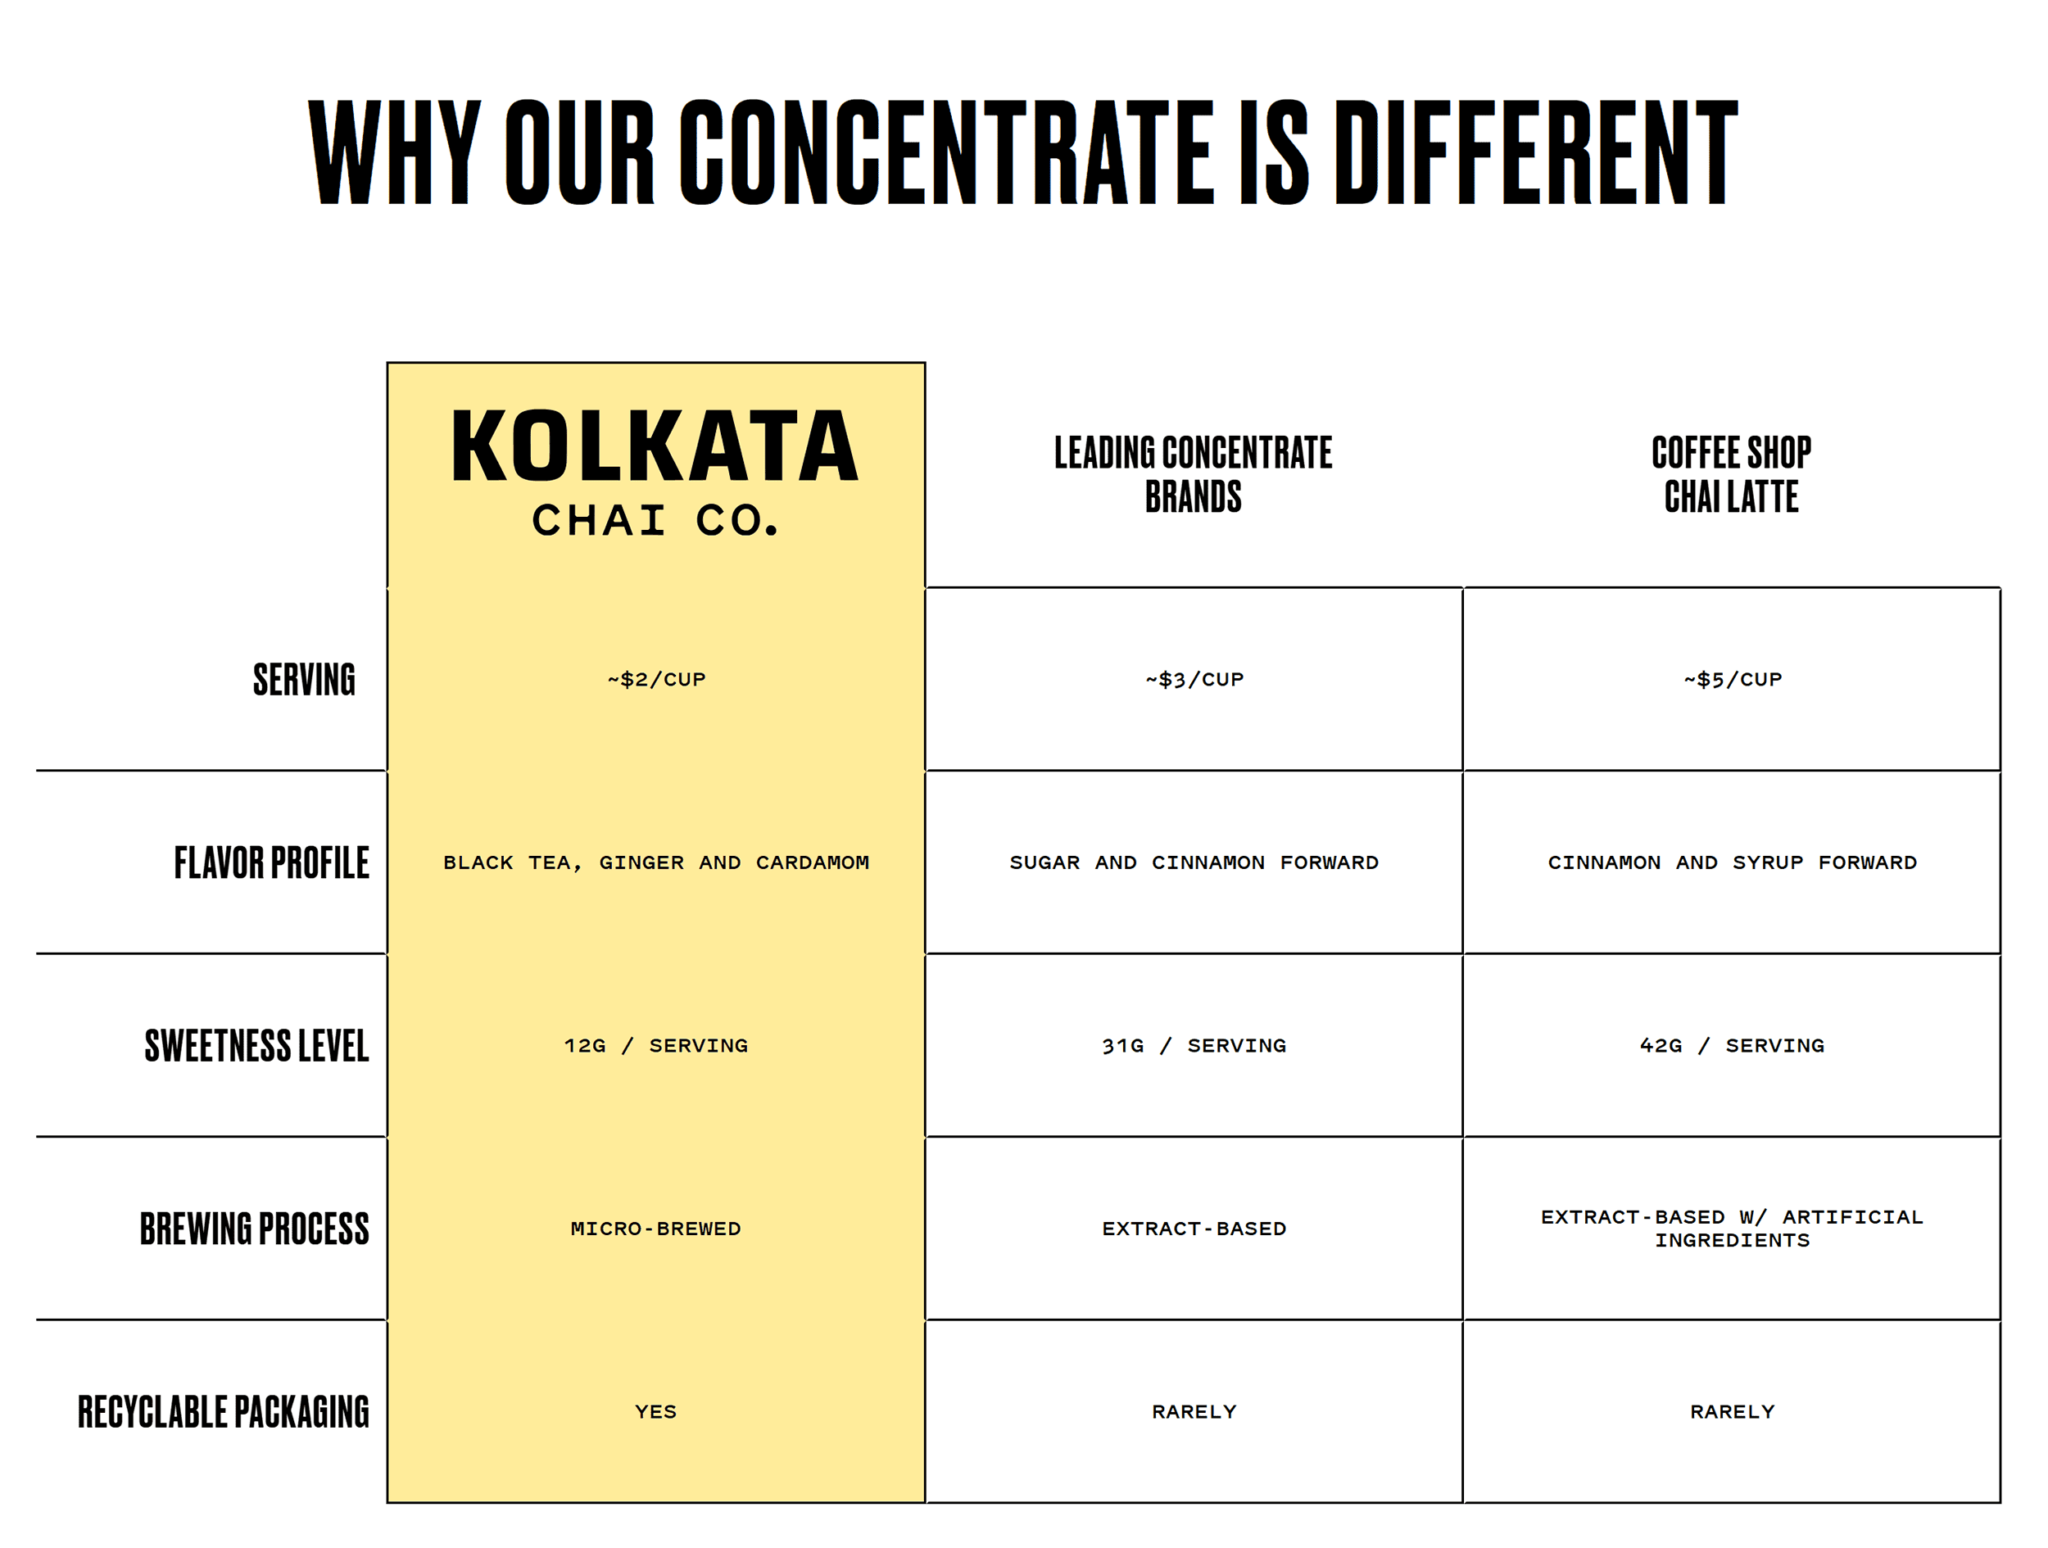 kolkata-vs-competition 20 Effective Product Page Examples (+ Best Practices)